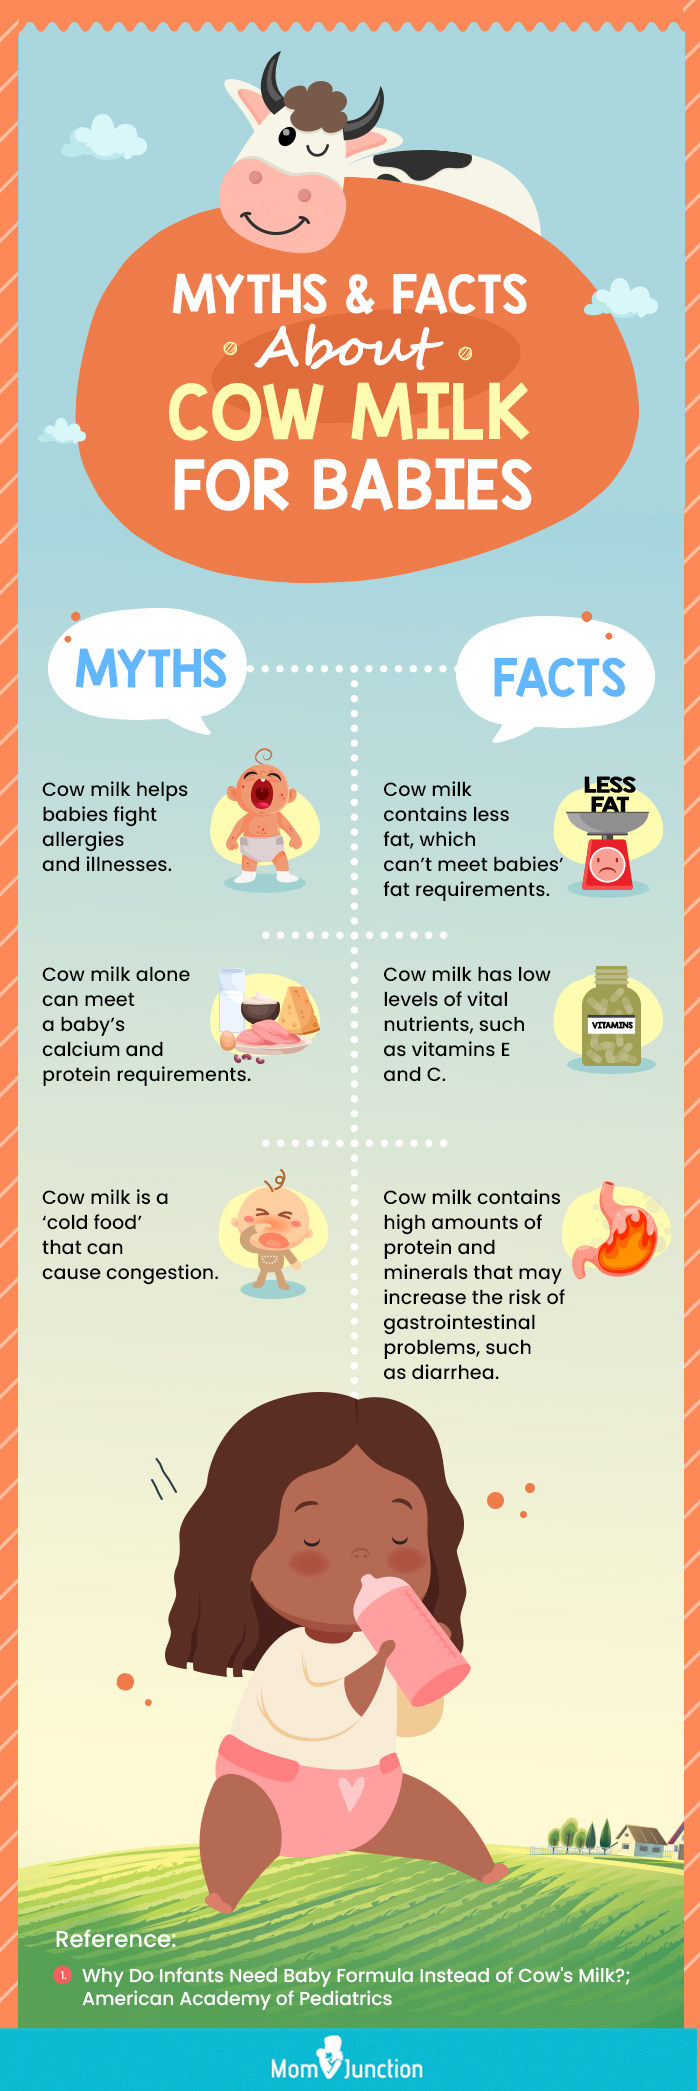 https://www.momjunction.com/wp-content/uploads/2014/05/Infographic-Common-Misconceptions-About-Cow-Milk-For-Babies.jpg